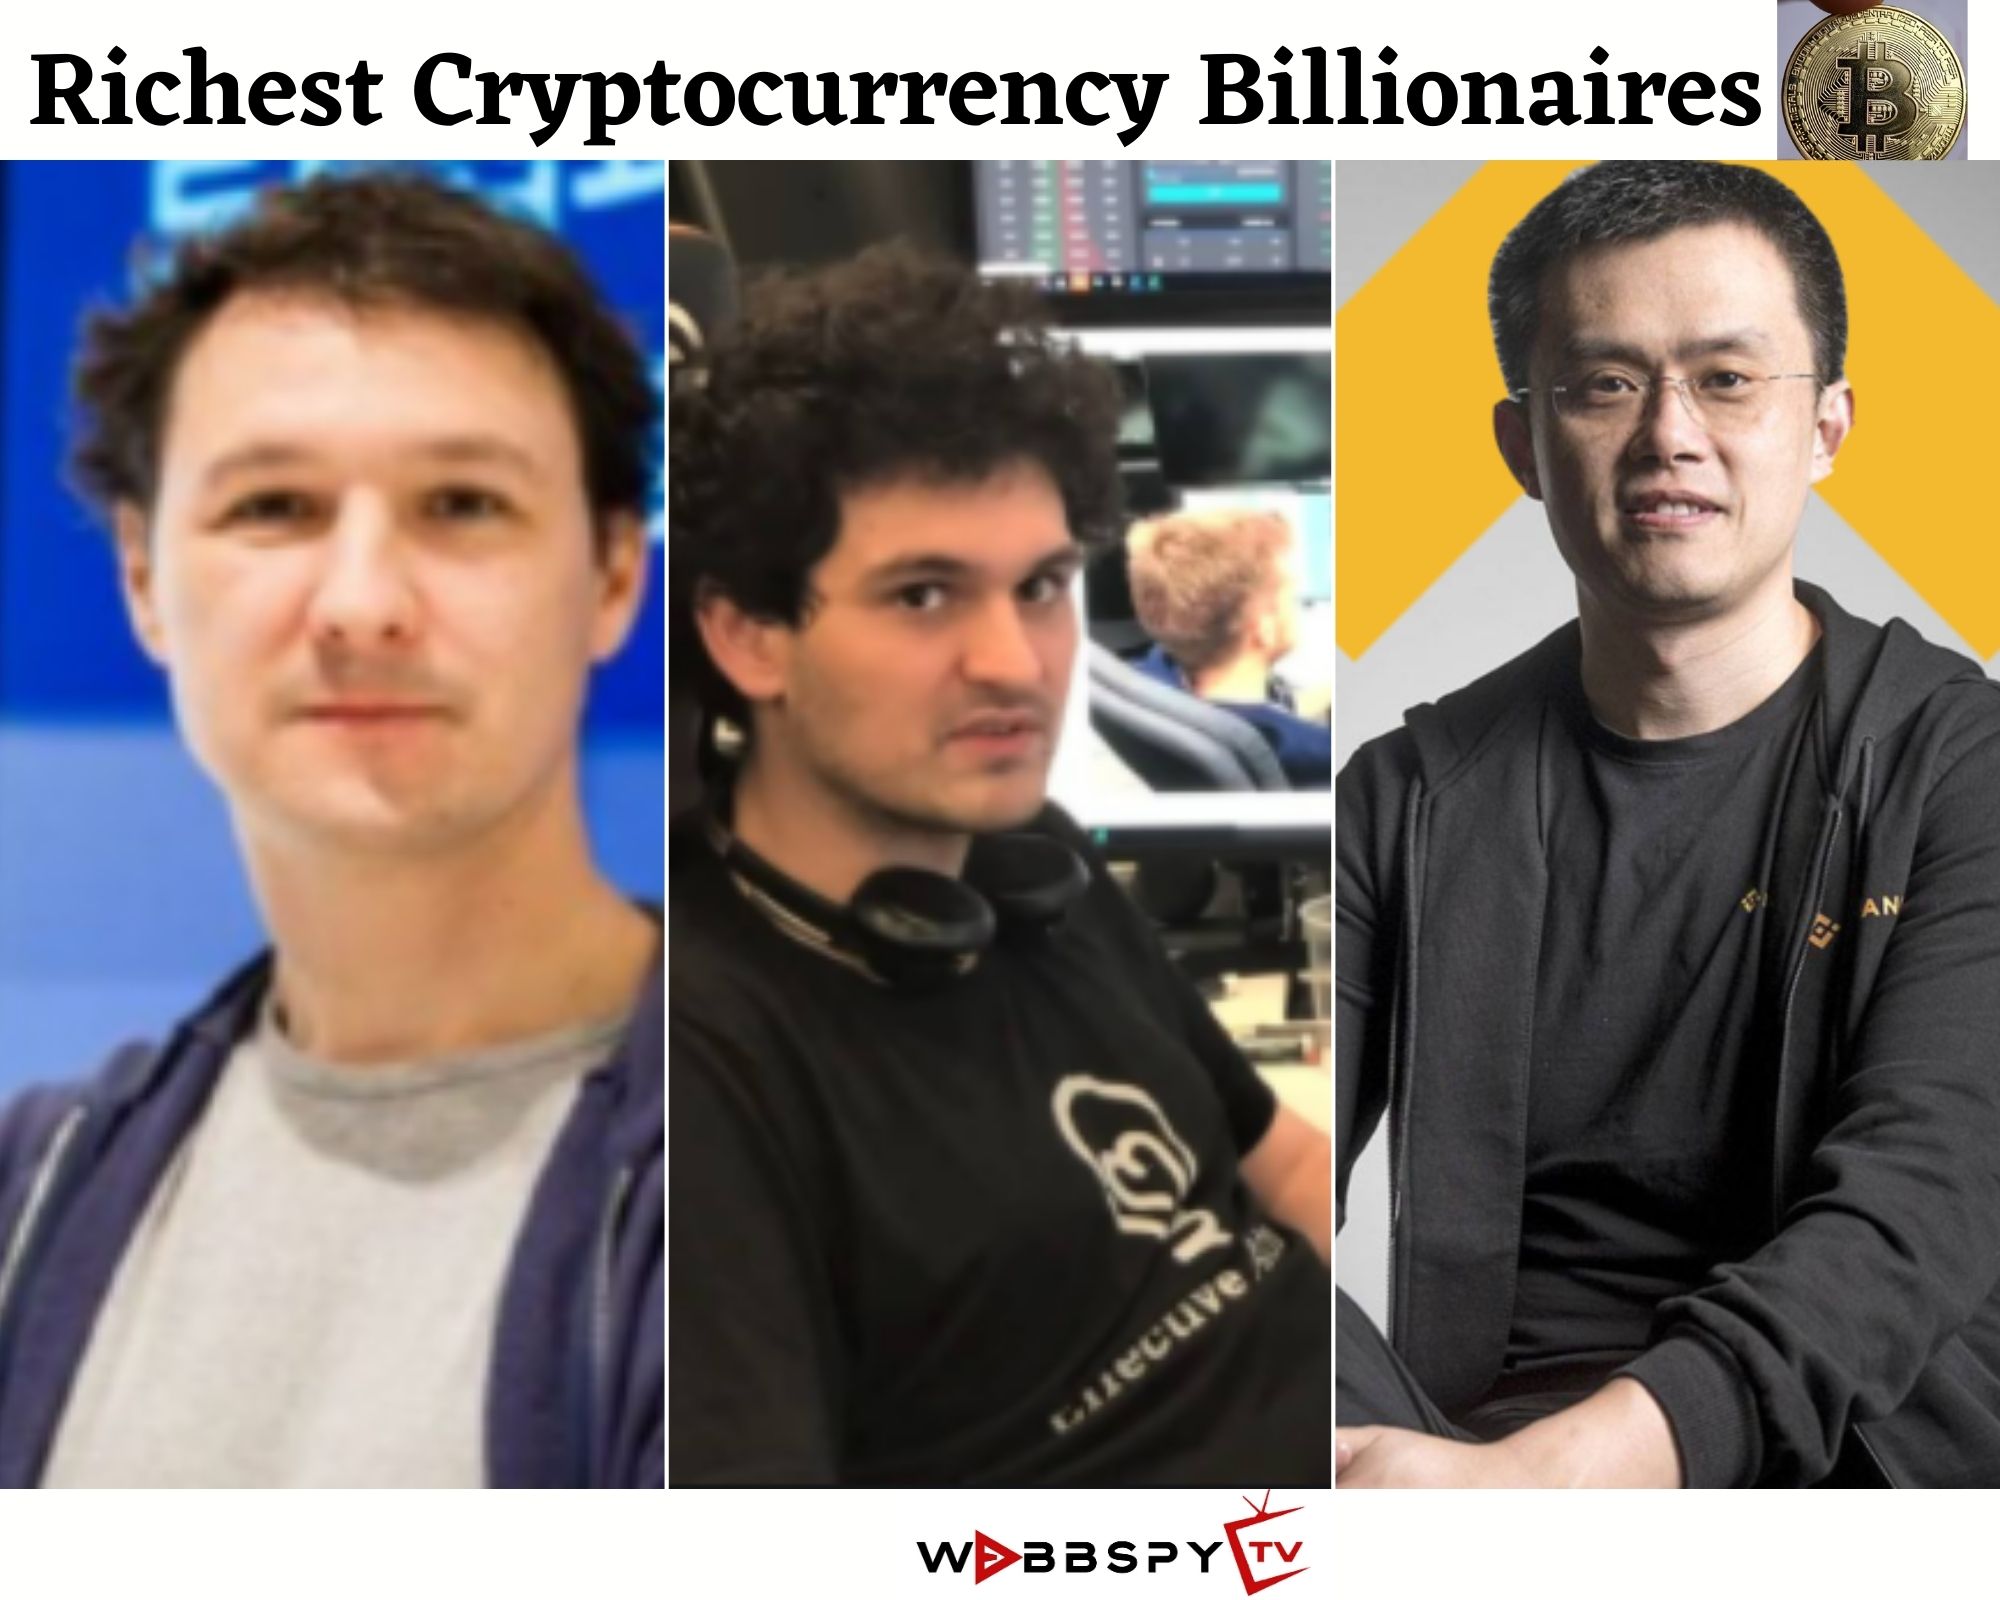 Richest Cryptocurrency Billionaires in the World 2021